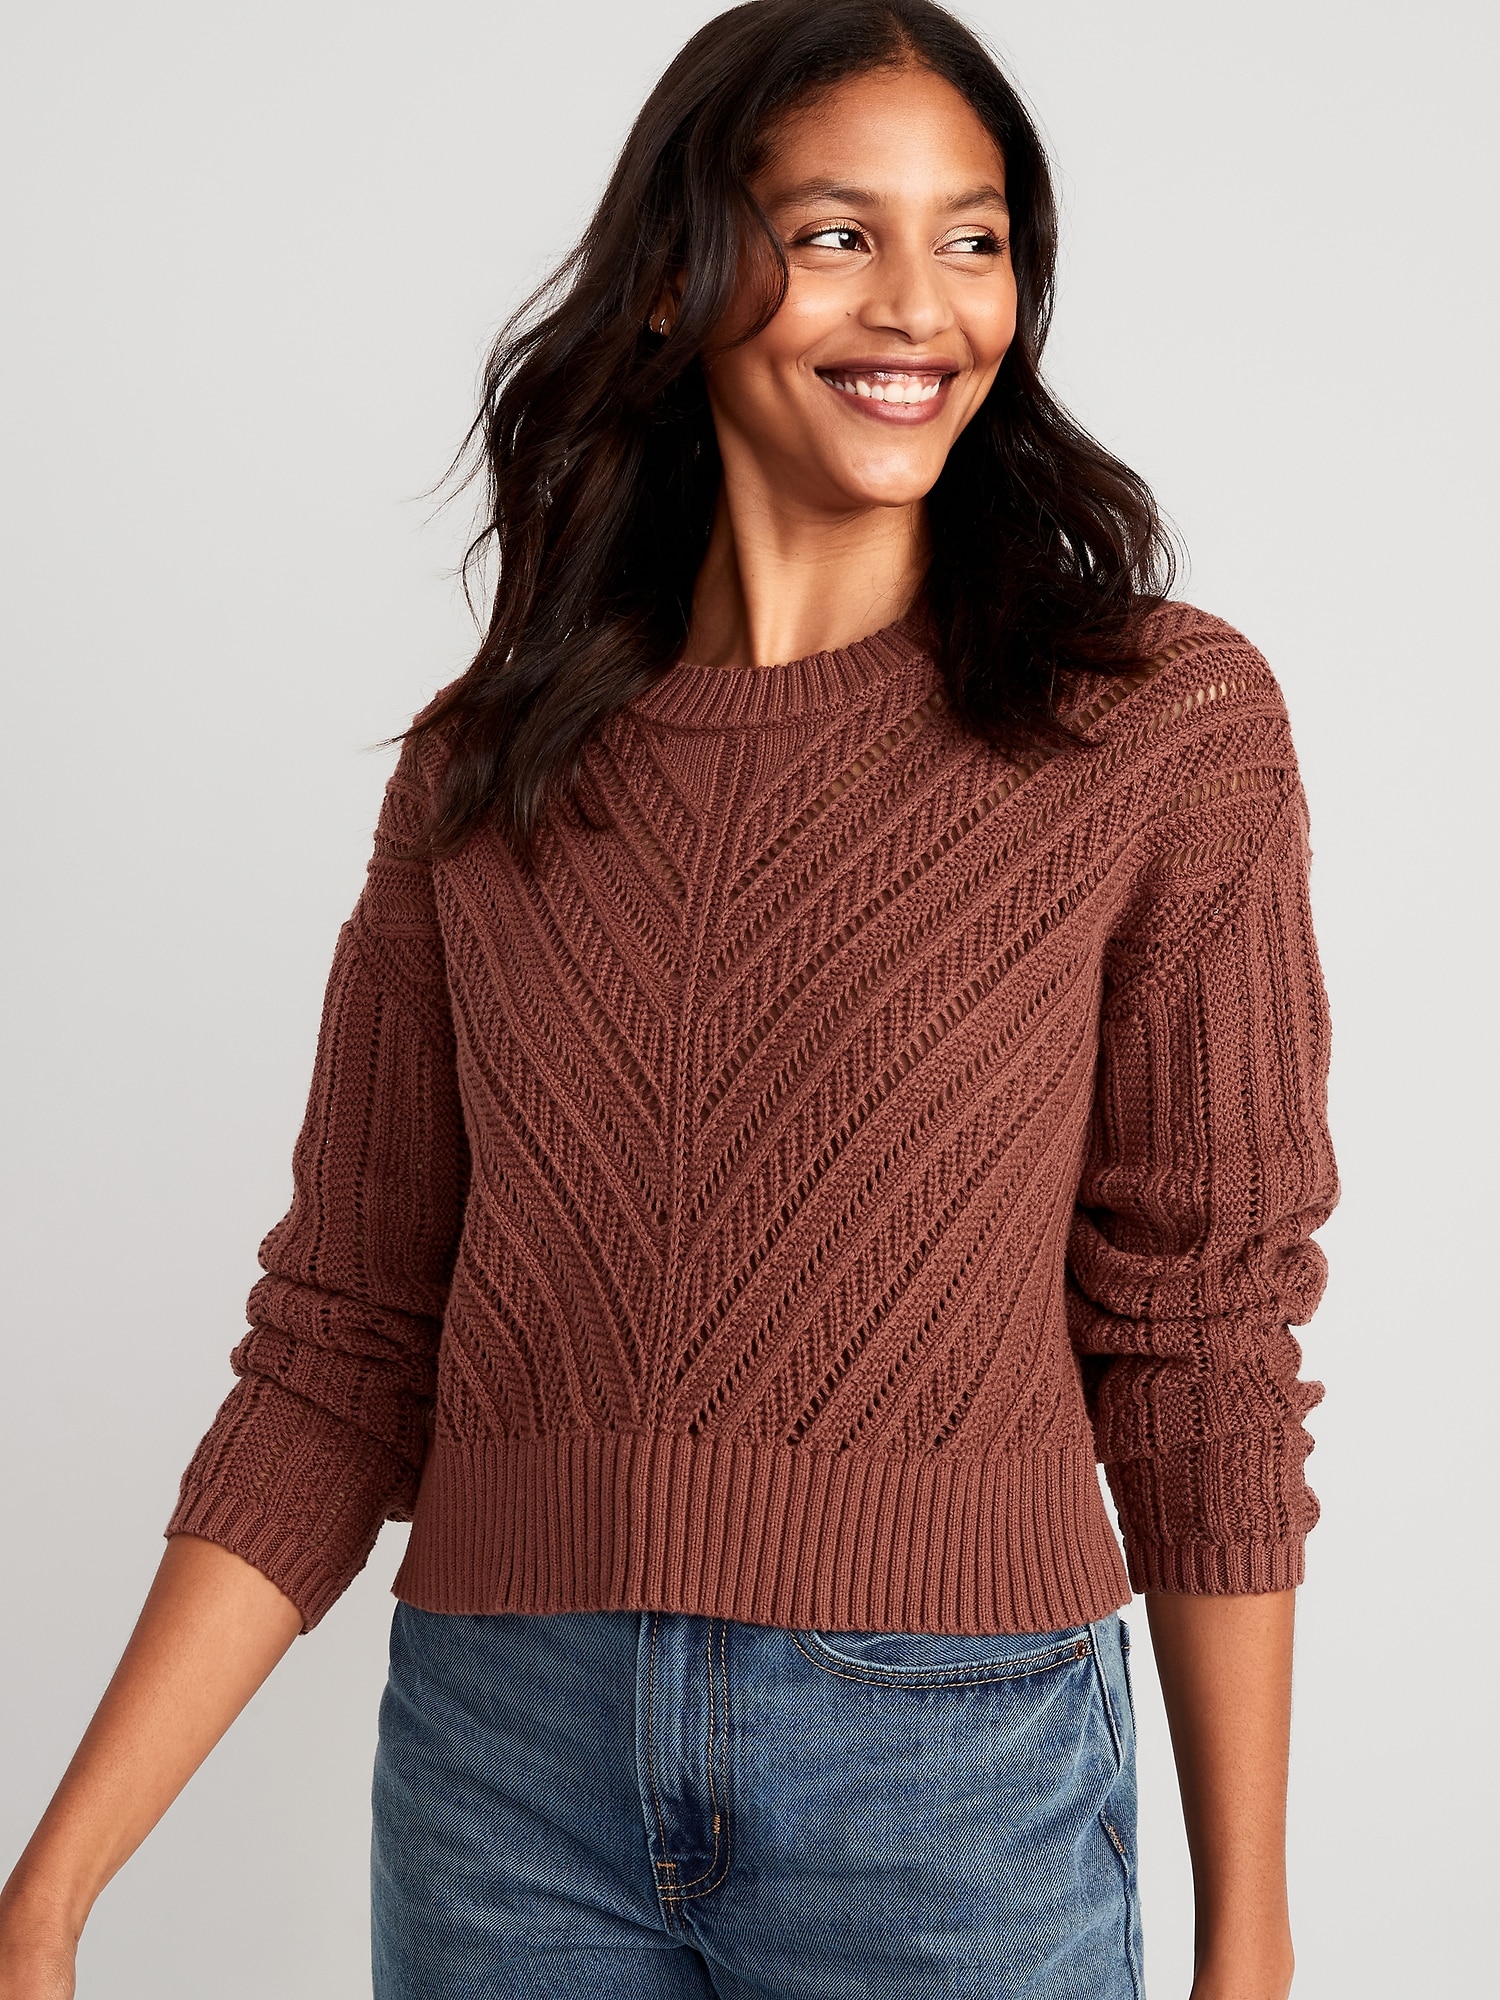 Old Navy Cropped Chevron Open-Knit Sweater for Women brown. 1